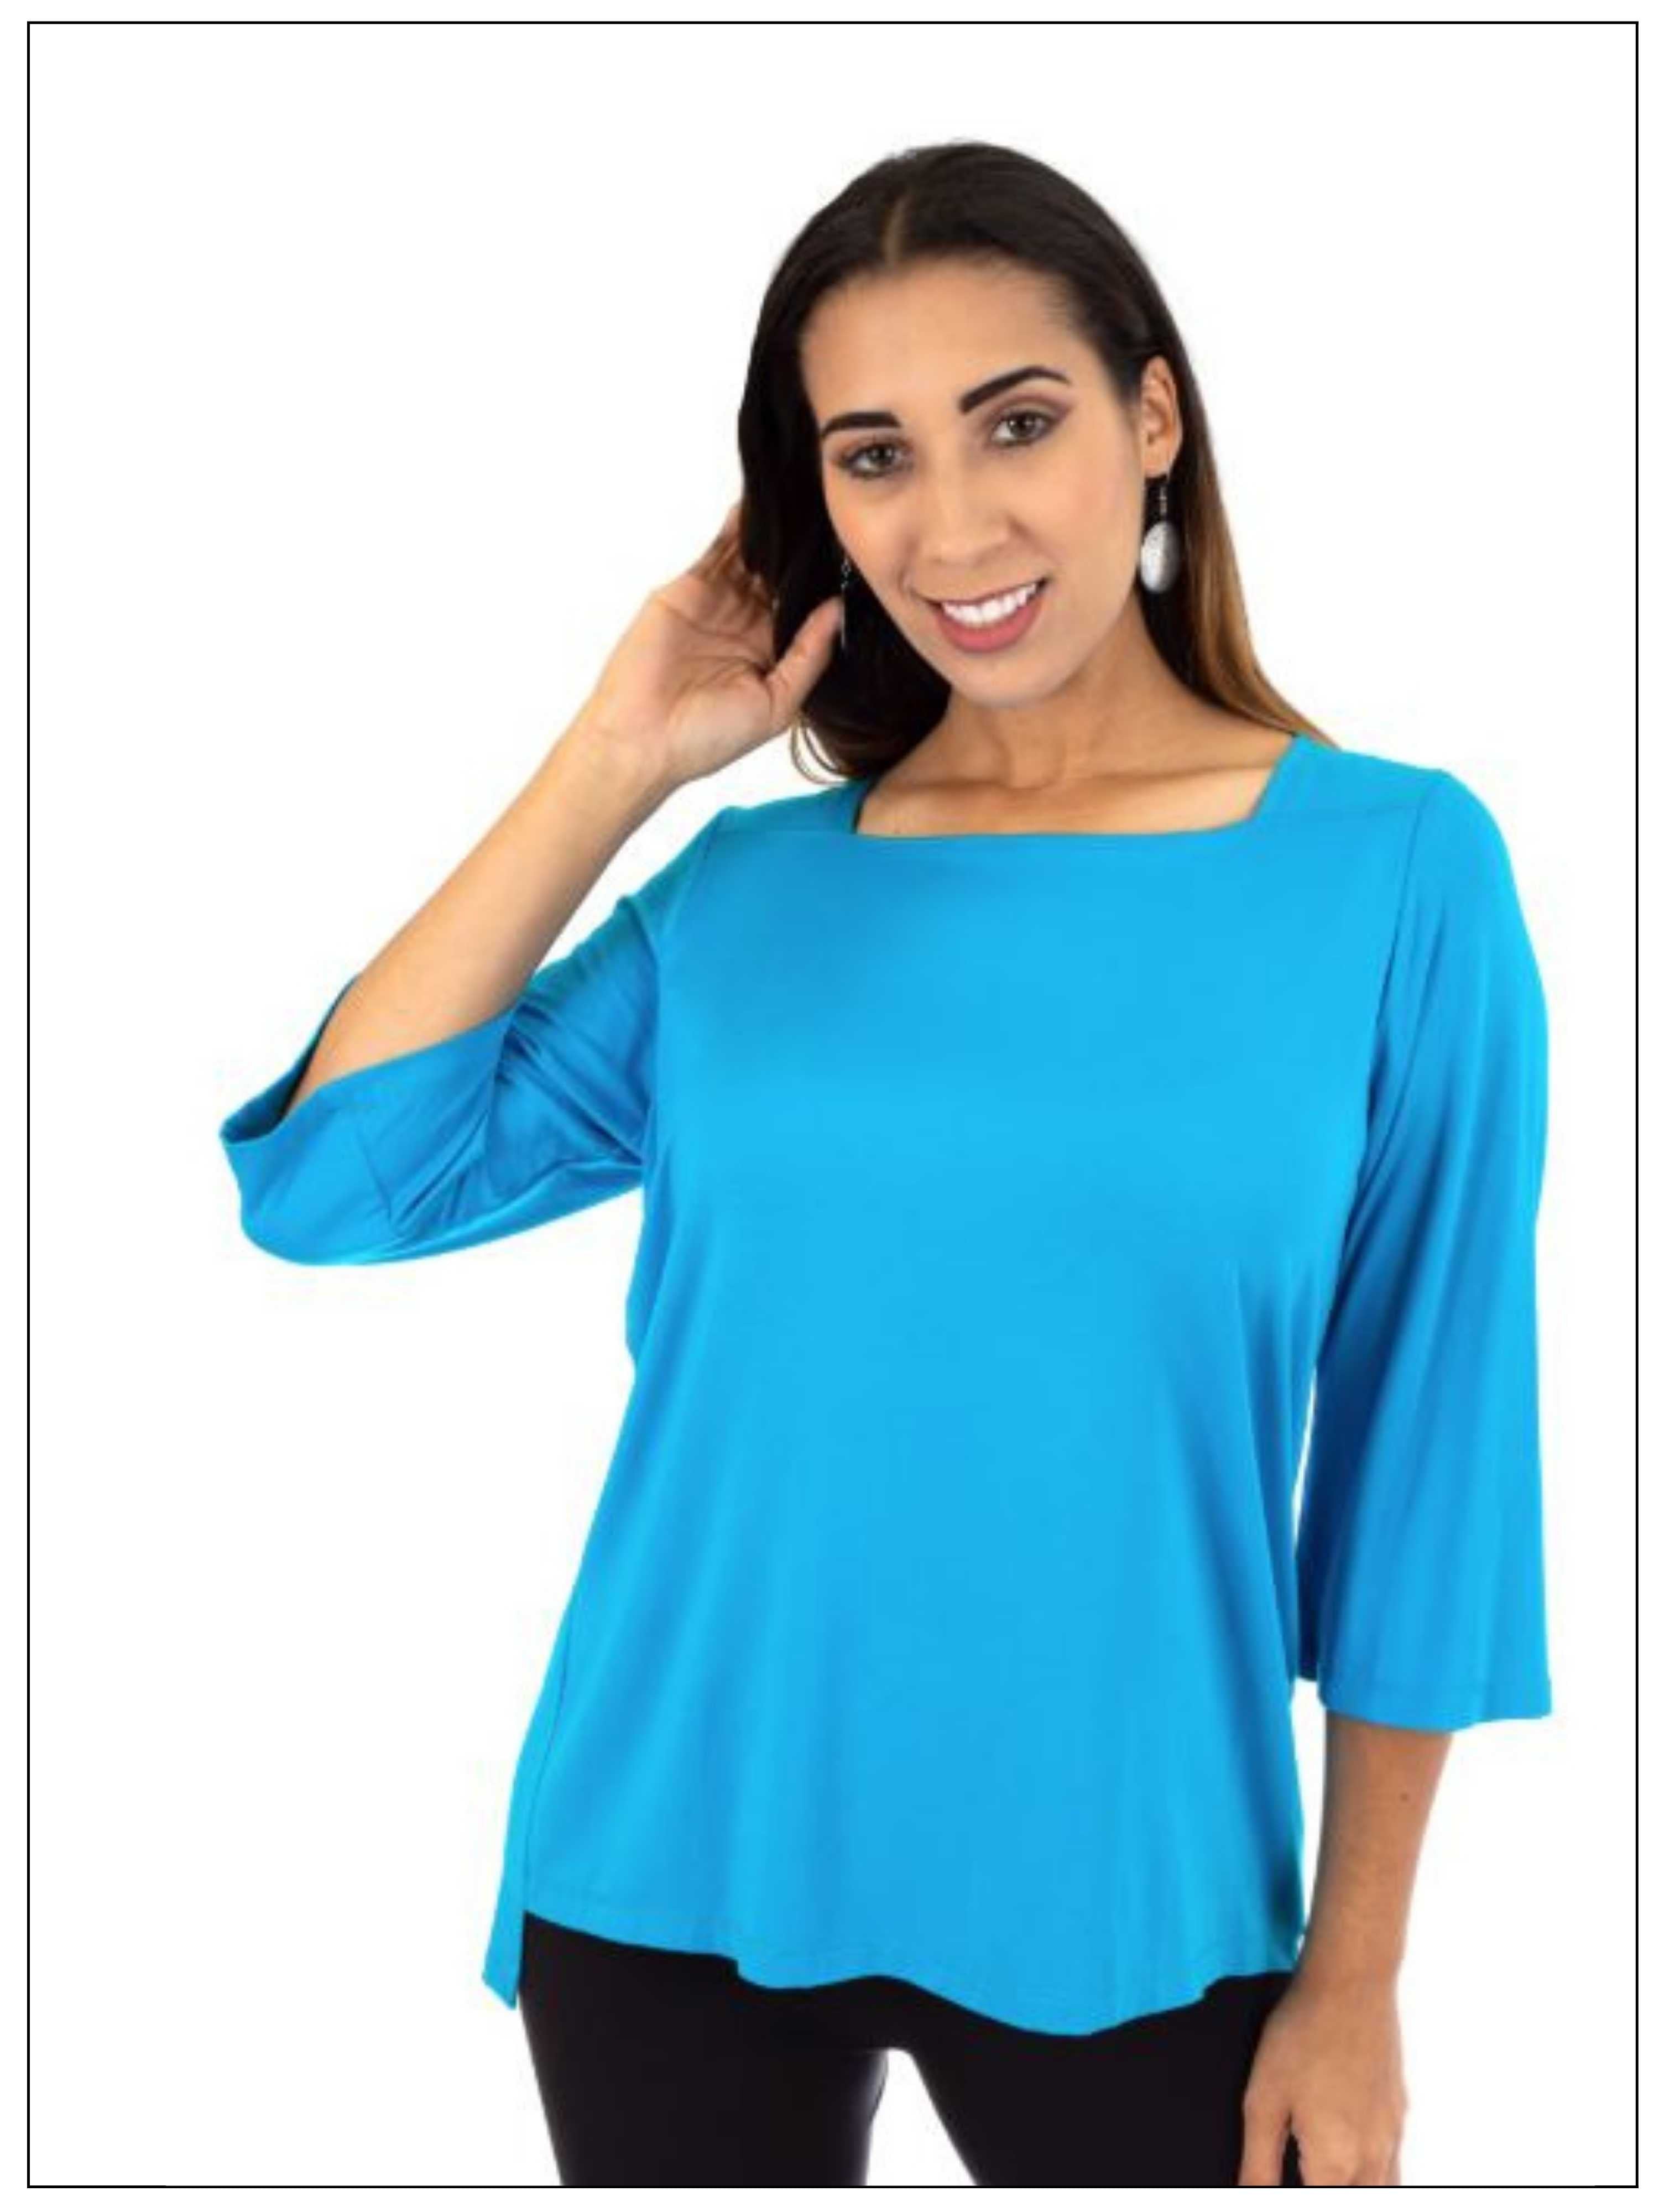 Square Neck 3/4 Sleeve Top - T544 SALE